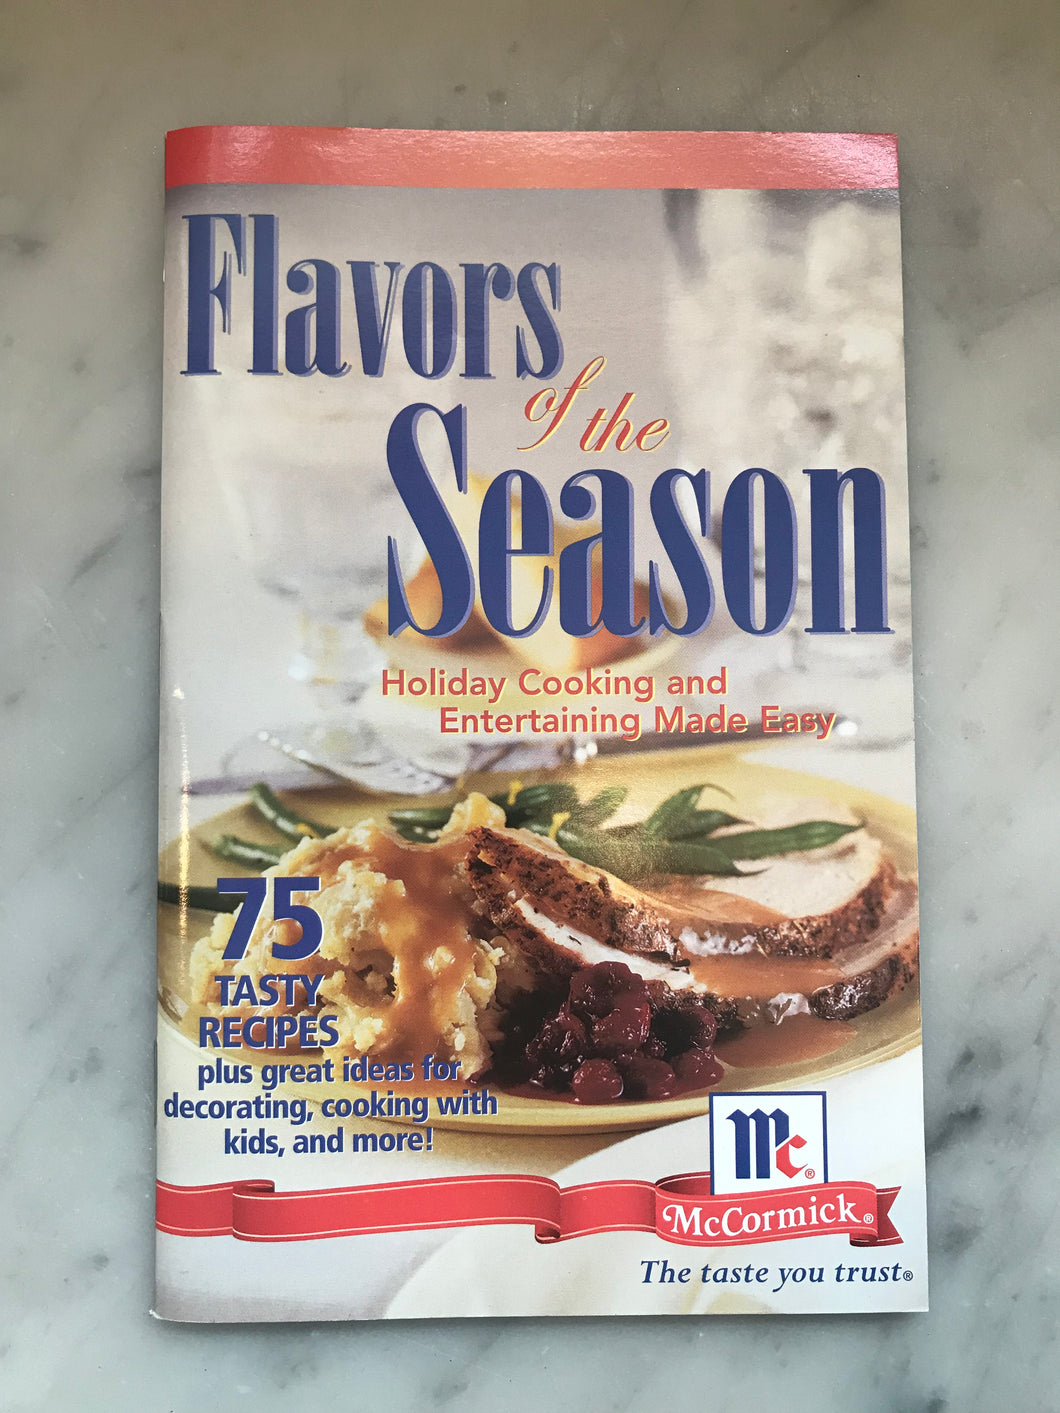 Flavors of the Season, Holiday Cooking and Entertaining Made Easy